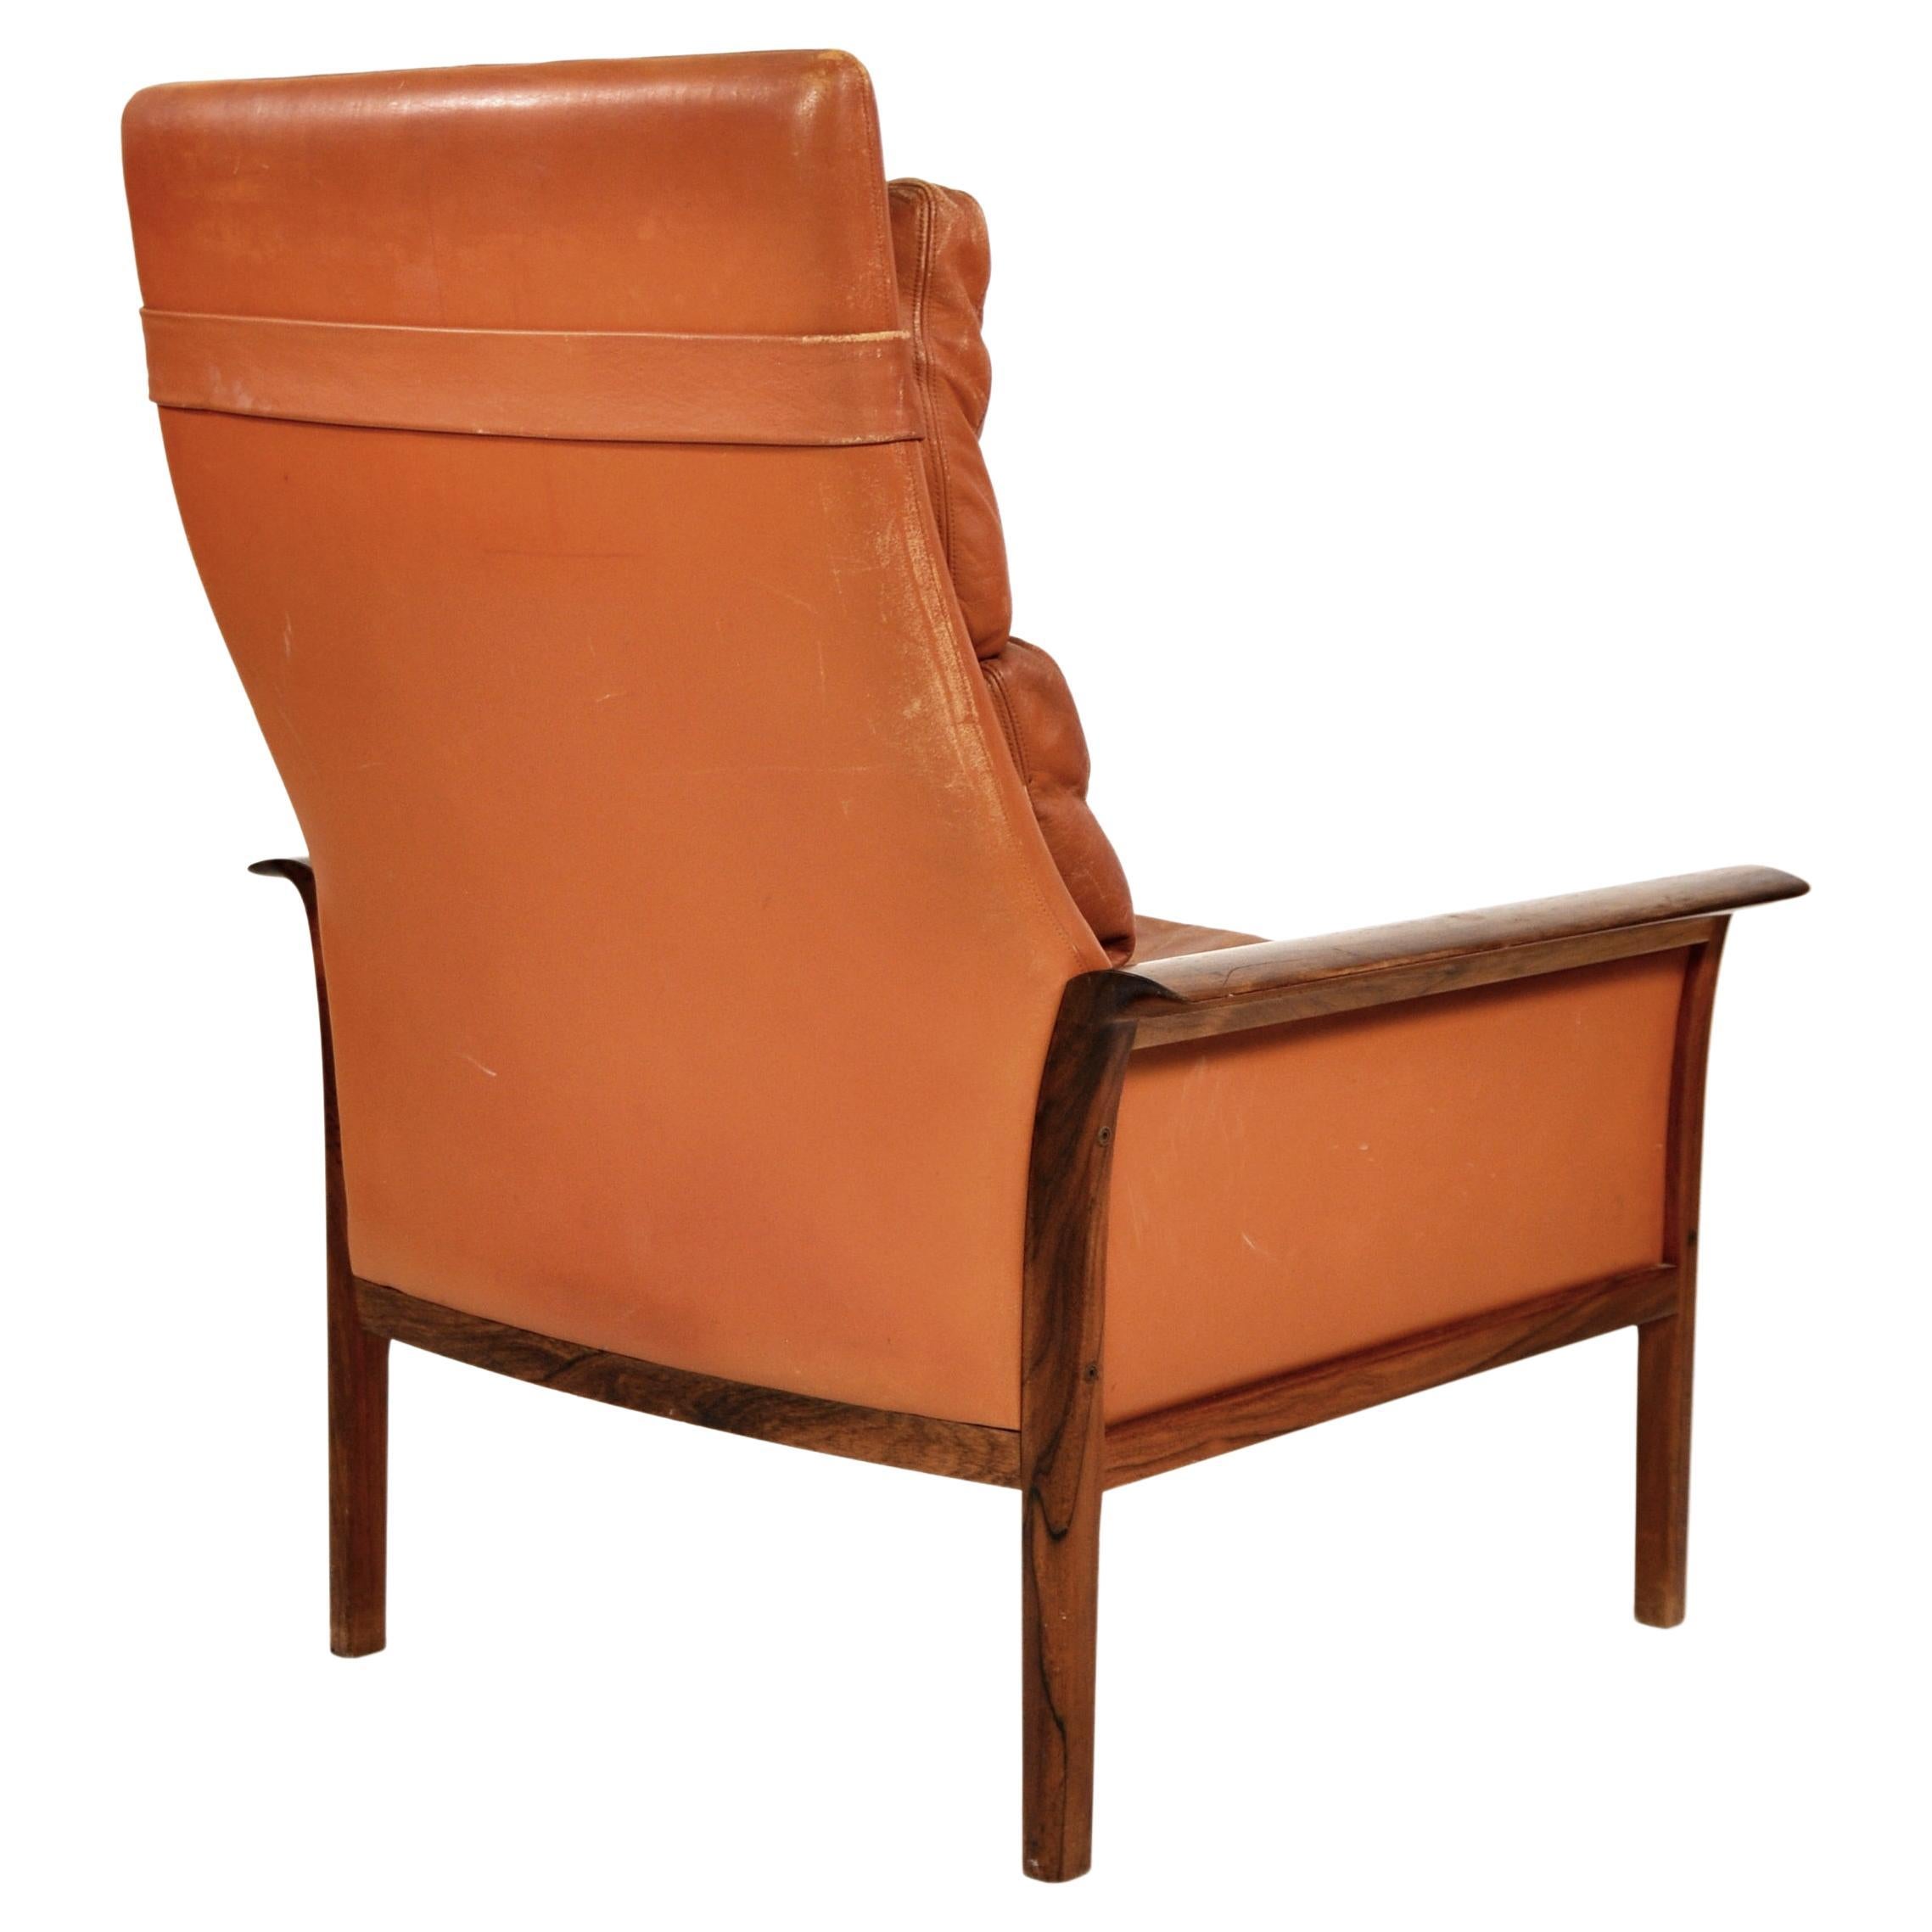 Rosewood Cognac Leather Chairs with Ottoman, by Fredrik Kayser for Vatne Mobler 2